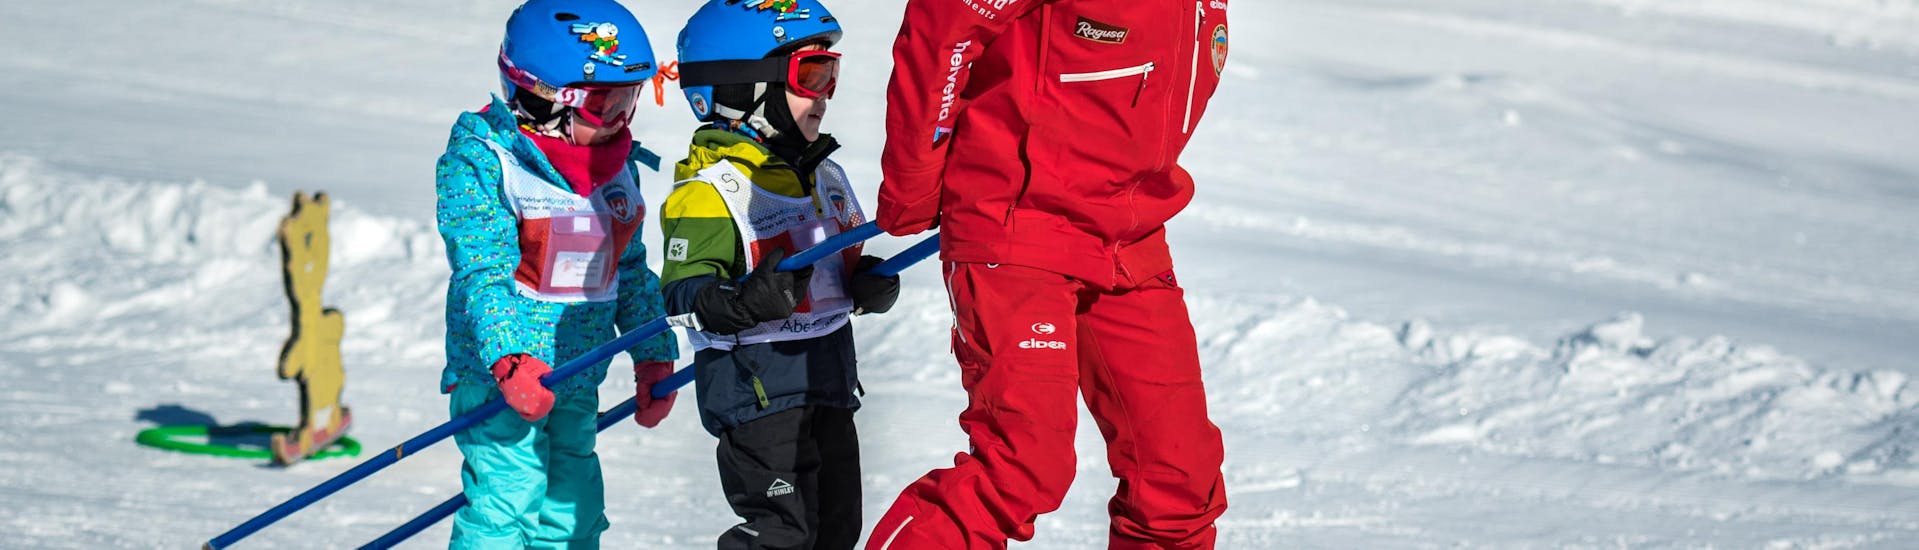 A ski instructor from the Swiss Ski School Grindelwald pulls two small children behind him during a private kids ski lesson for all levels.